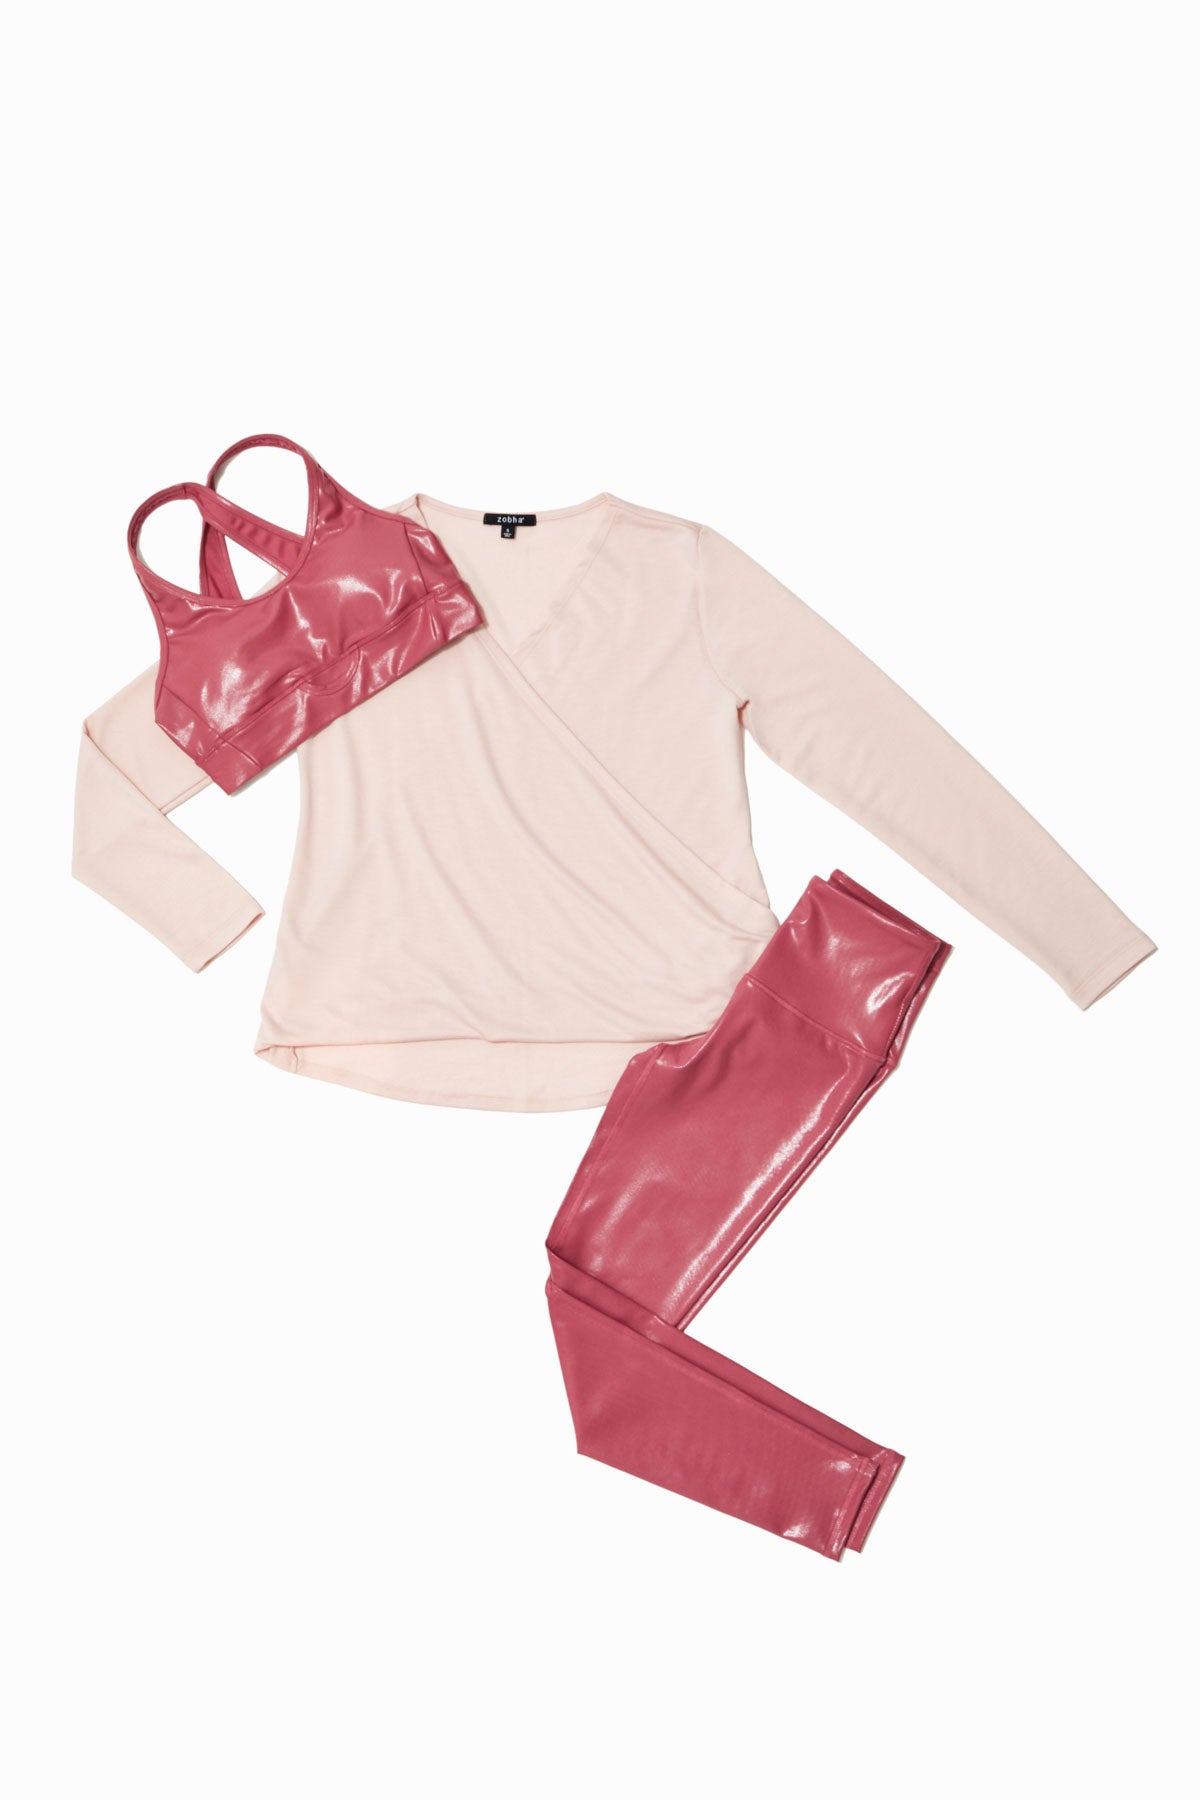 Positively Pink - 3 Items